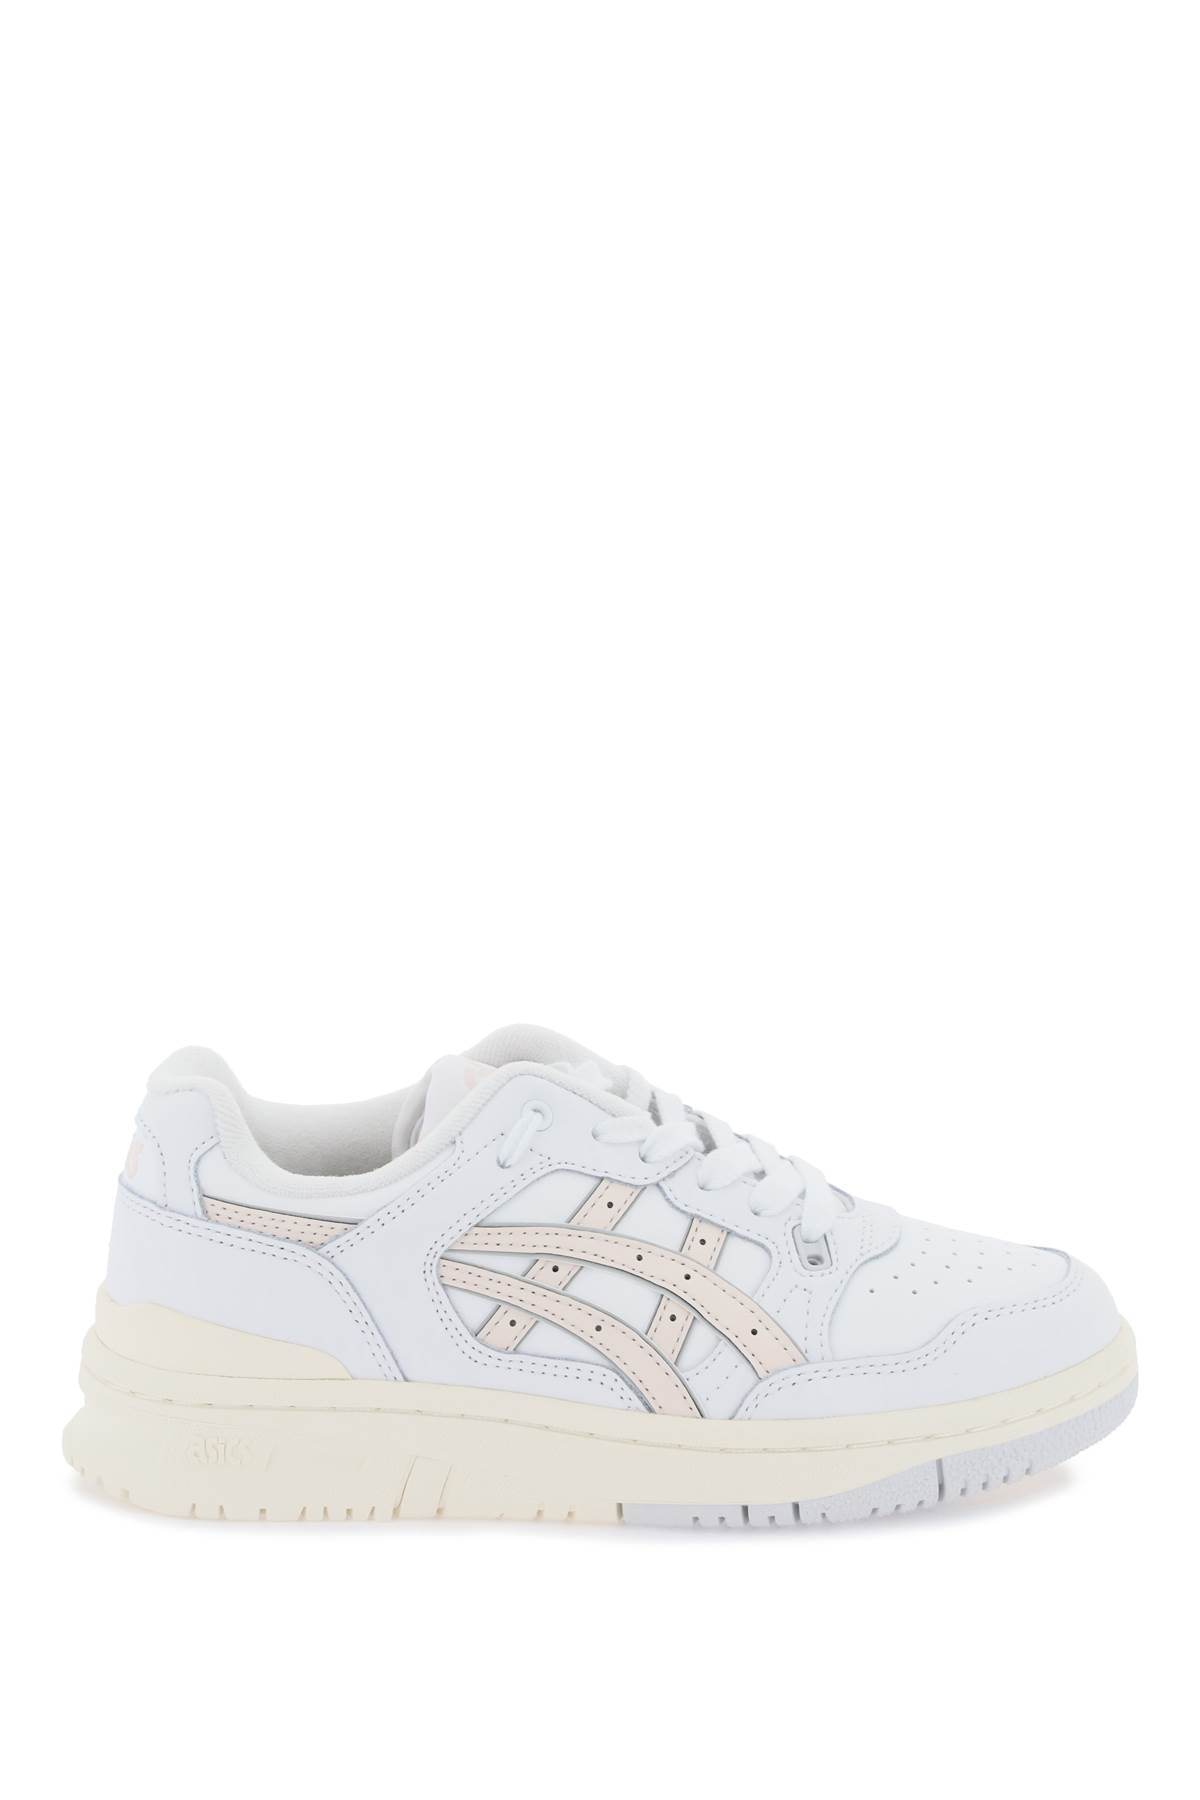 Shop Asics Ex89 Sneakers In White Mineral Beige (white)